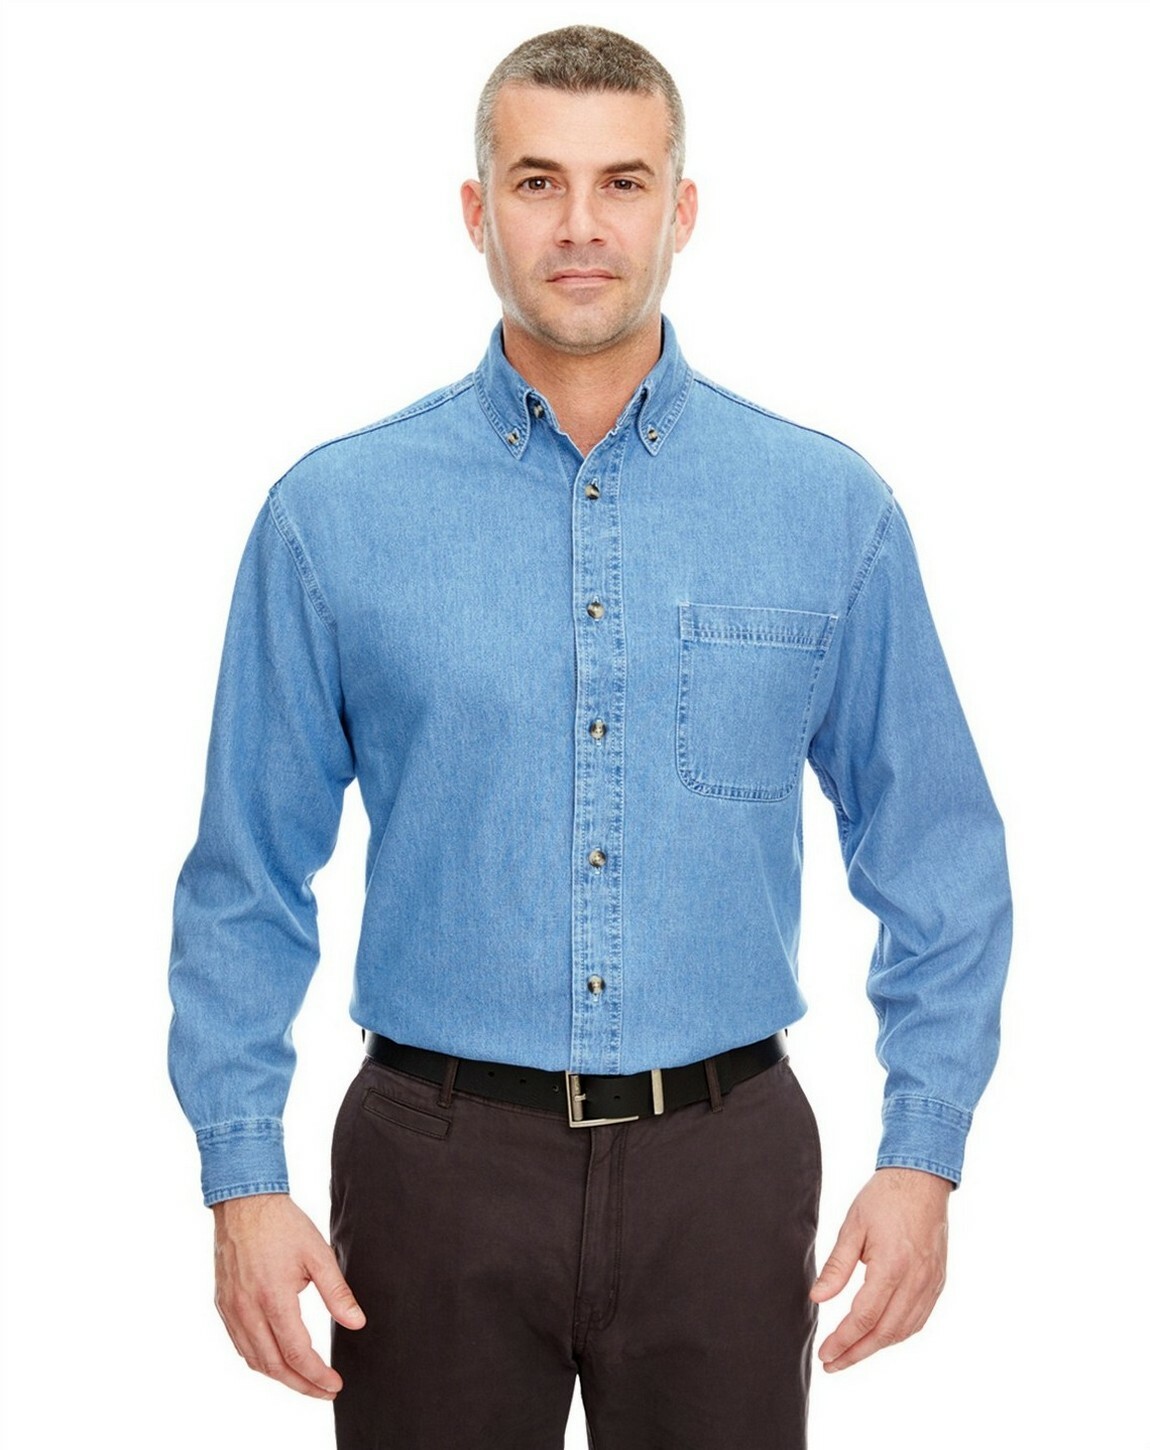 Denim Shirts - Buy Jeans Shirt for Men Online at Mufti